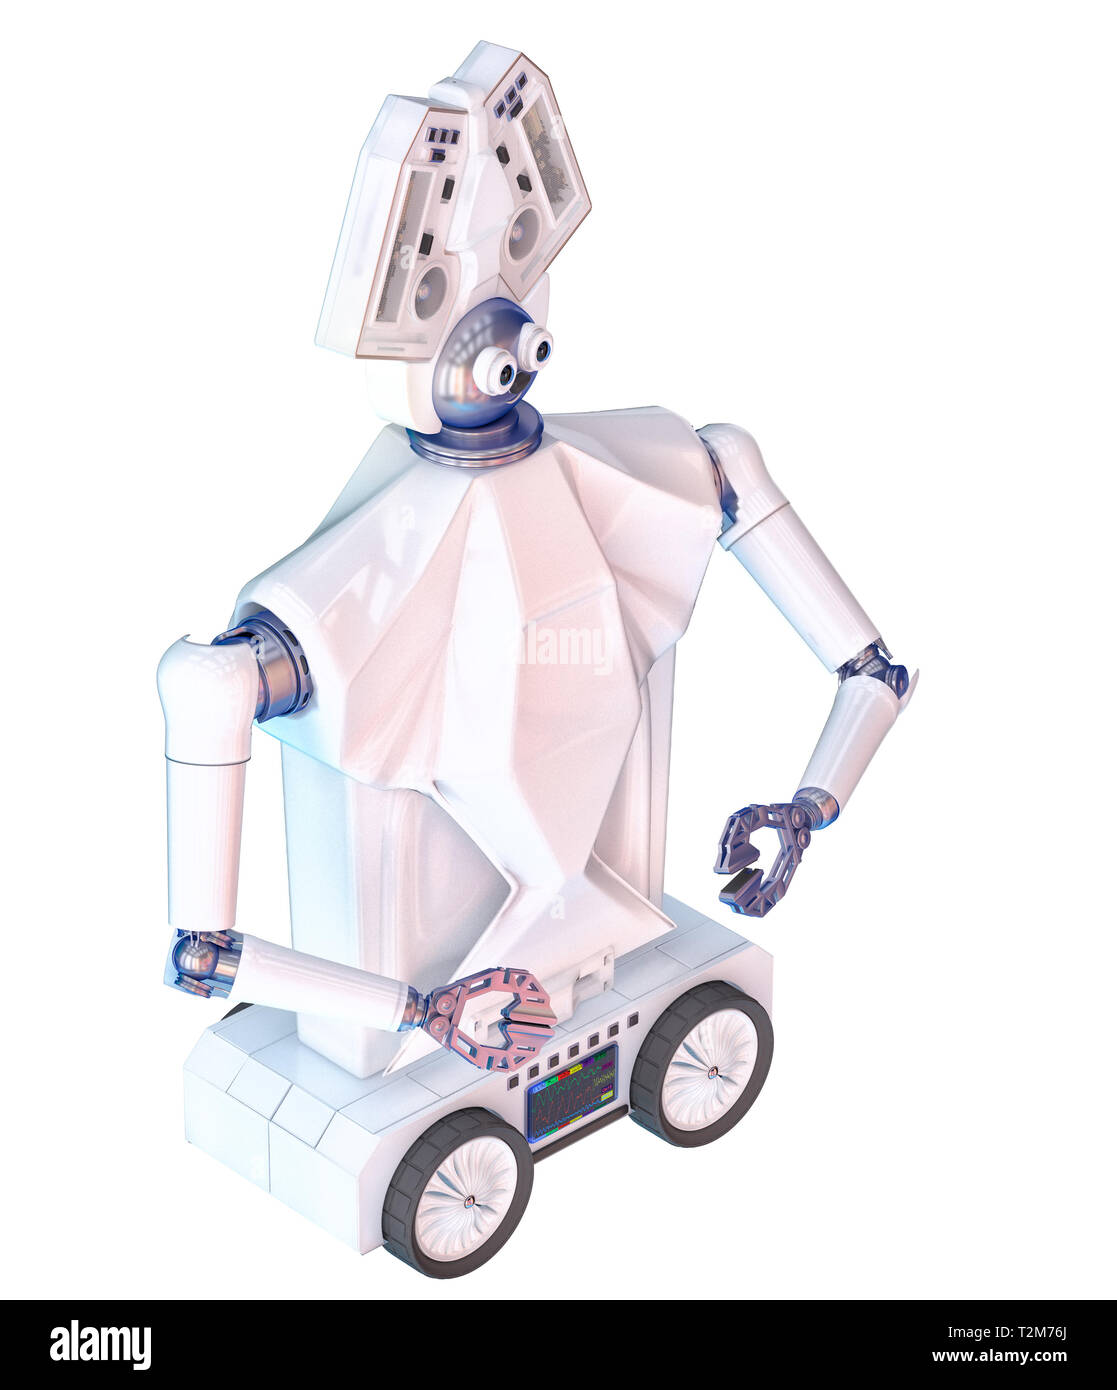 Programmable robot for education isolated on a white background. Electronic  white and red robot which can walk and execute user's commands. A low leve  Stock Photo - Alamy